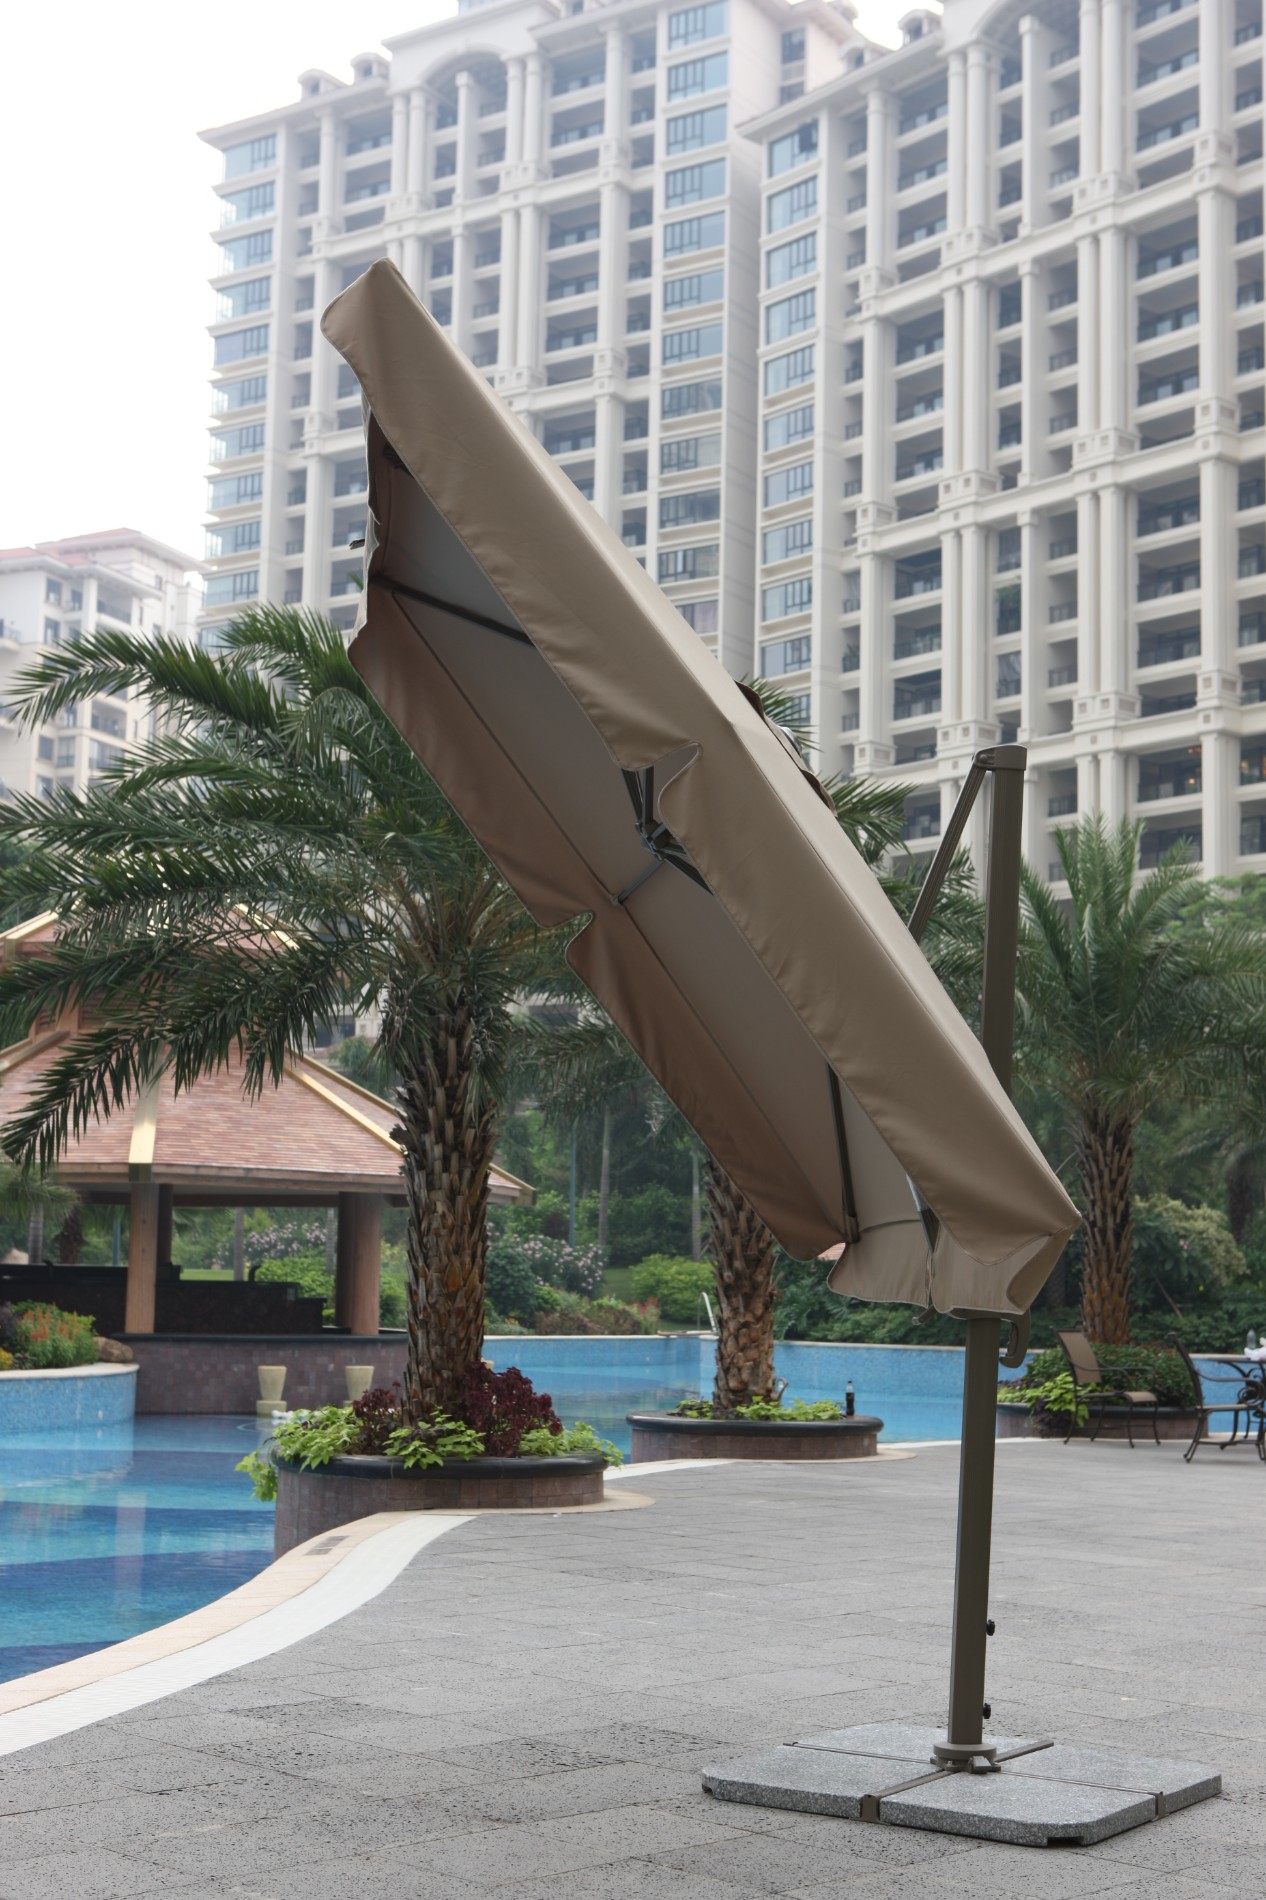 Outdoor Parasol With Aluminium Pole With Cross Base